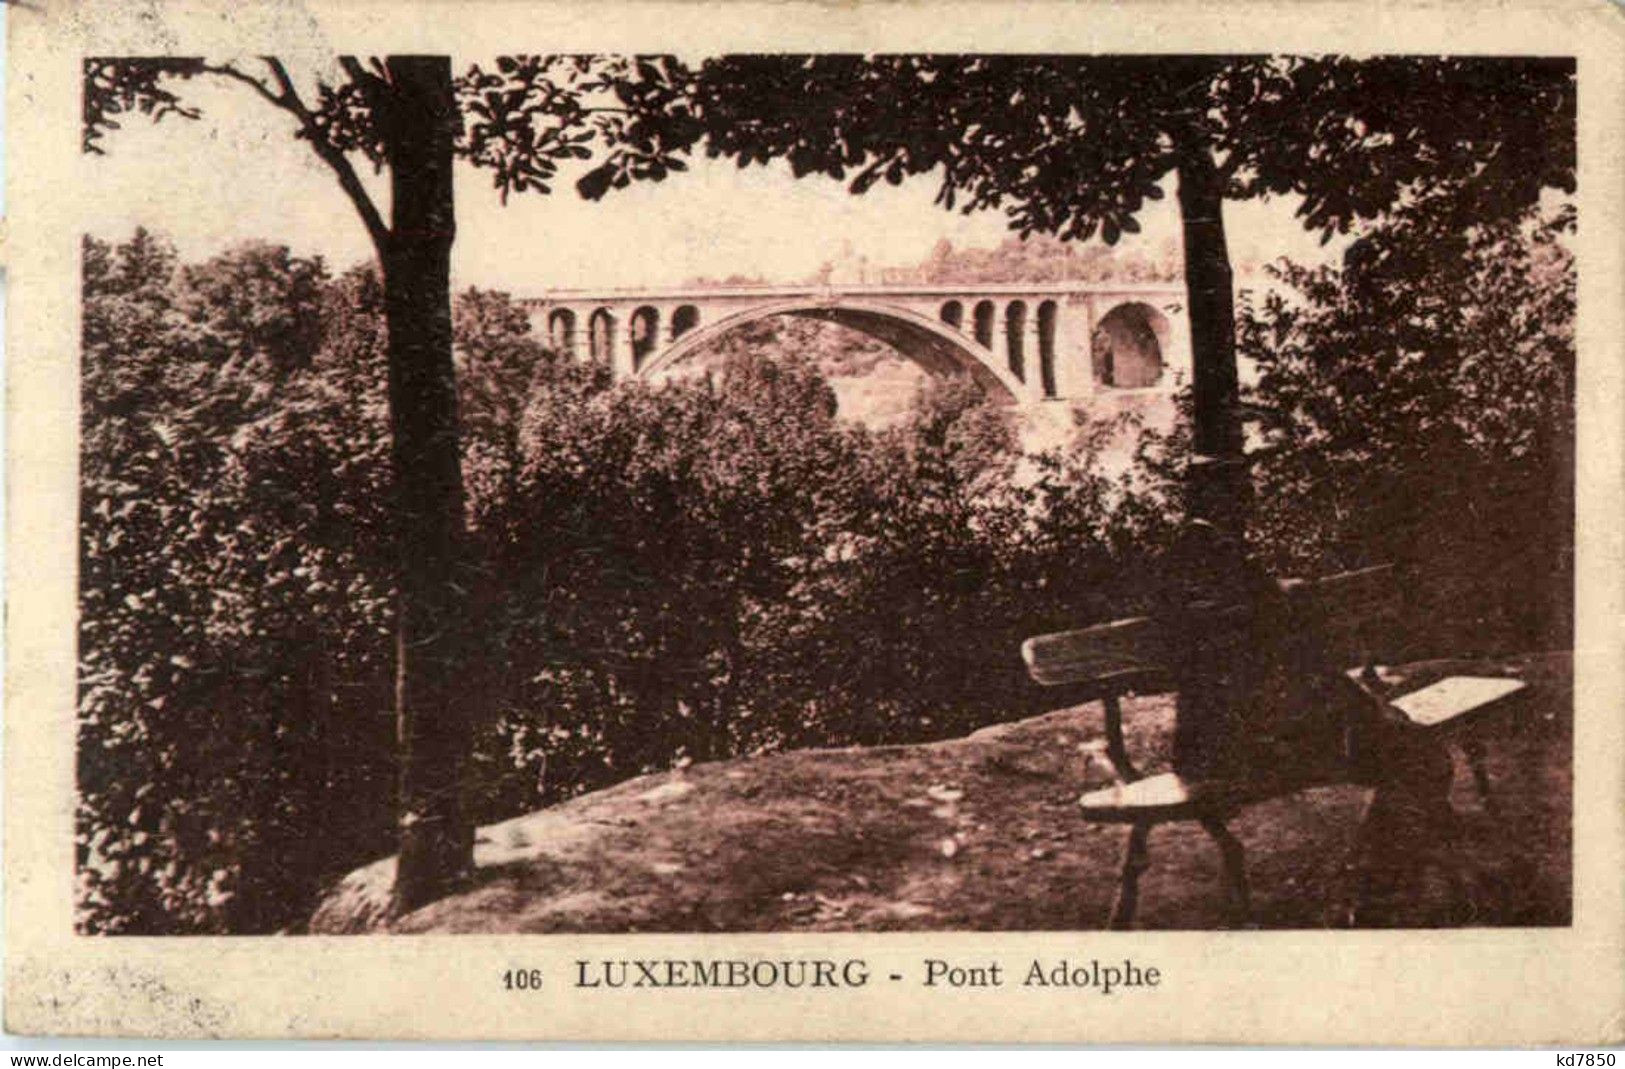 Ludembourg - Pont Adolphe - Luxembourg - Ville